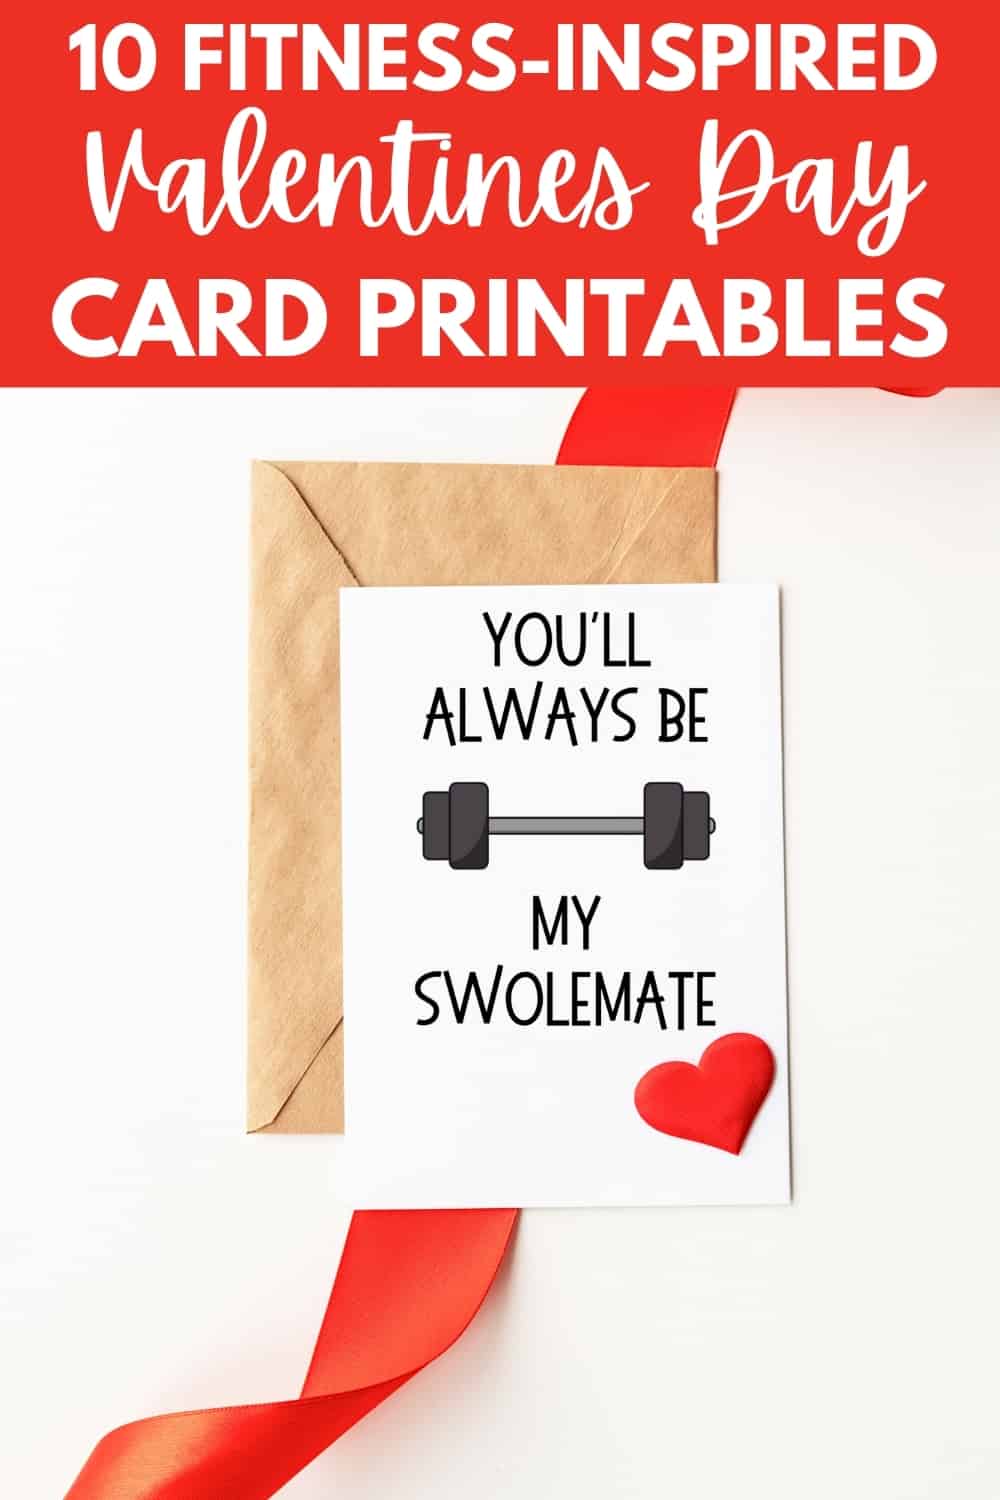 A fitness valentine's day card next to an envelope and red ribbon.